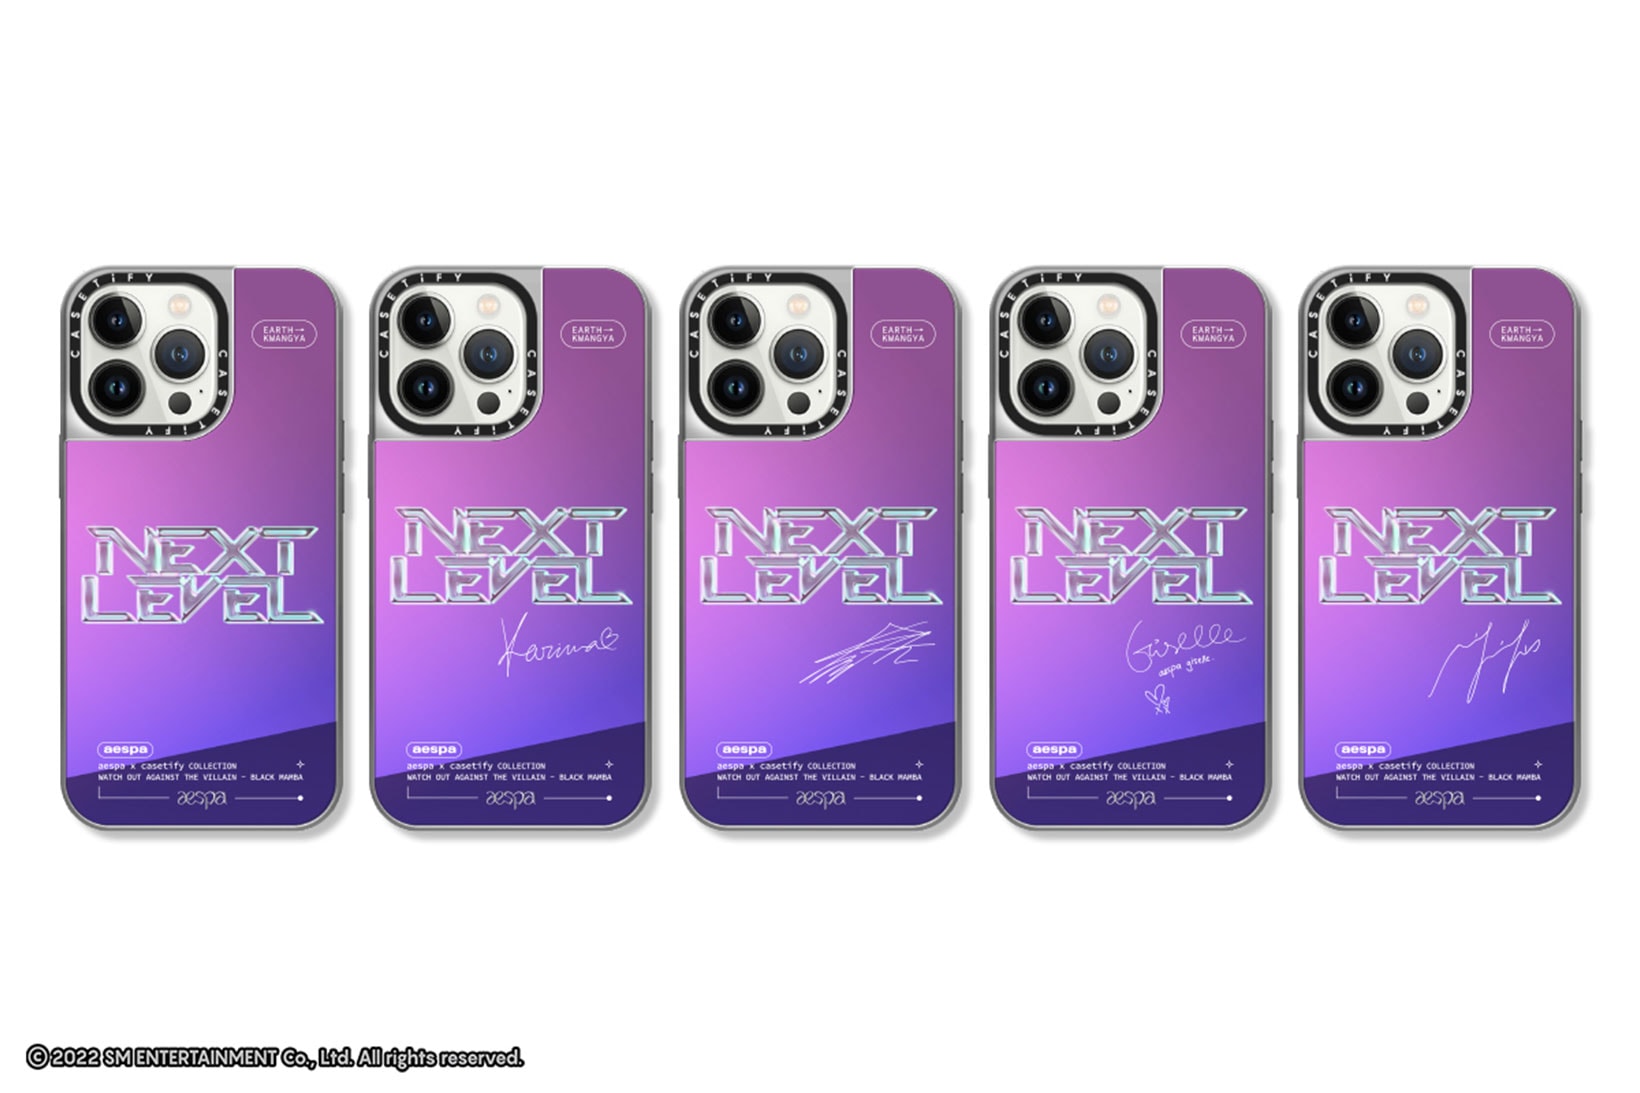 aespa Casetify K-pop Group Phone Cases AirPods Covers Tech Accessories Collaboration Release